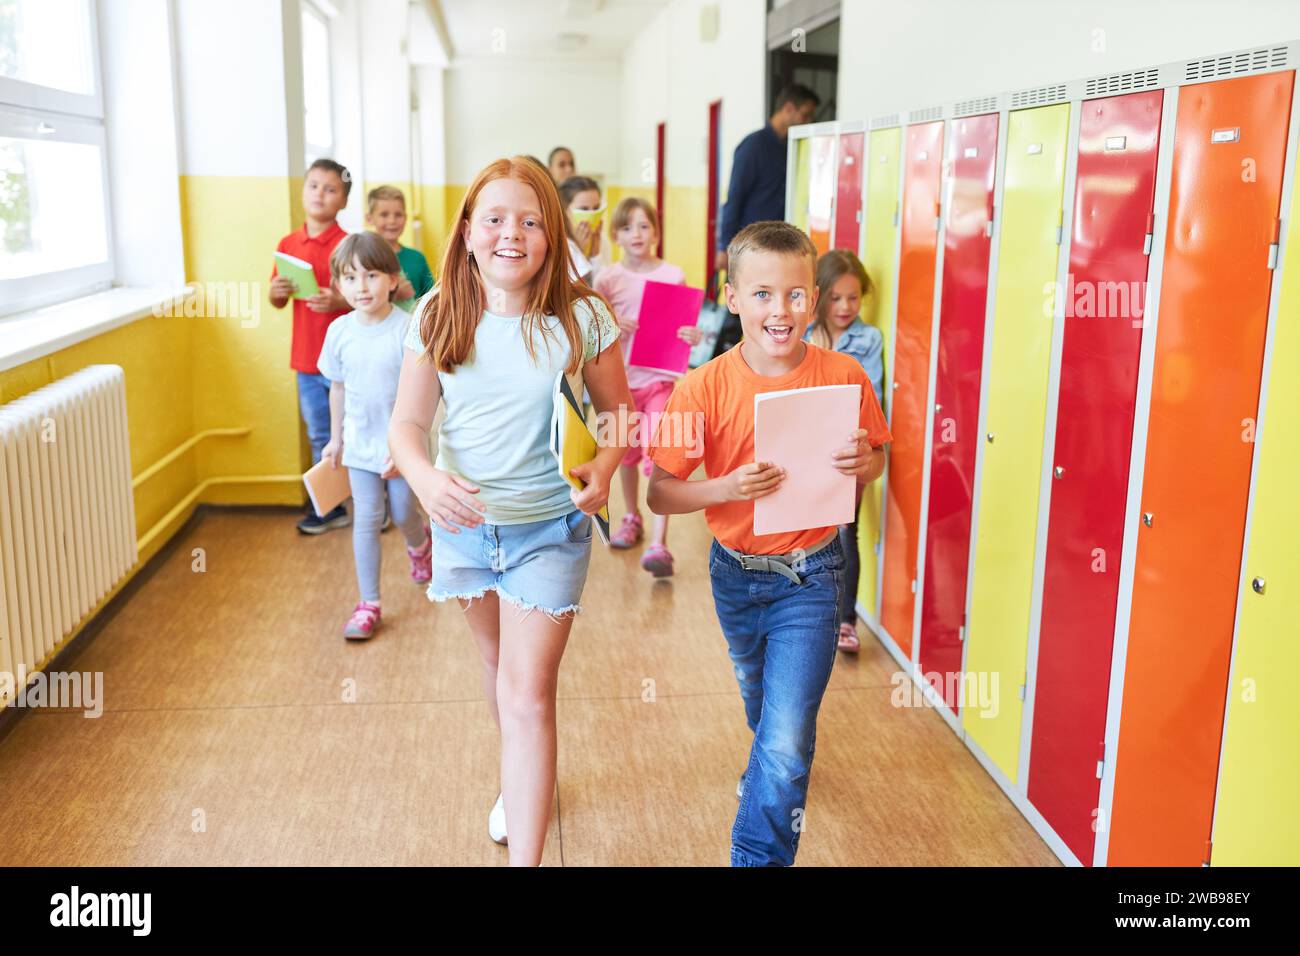 Group of elementary school children running in hallway during recess to their lockers Stock Photo